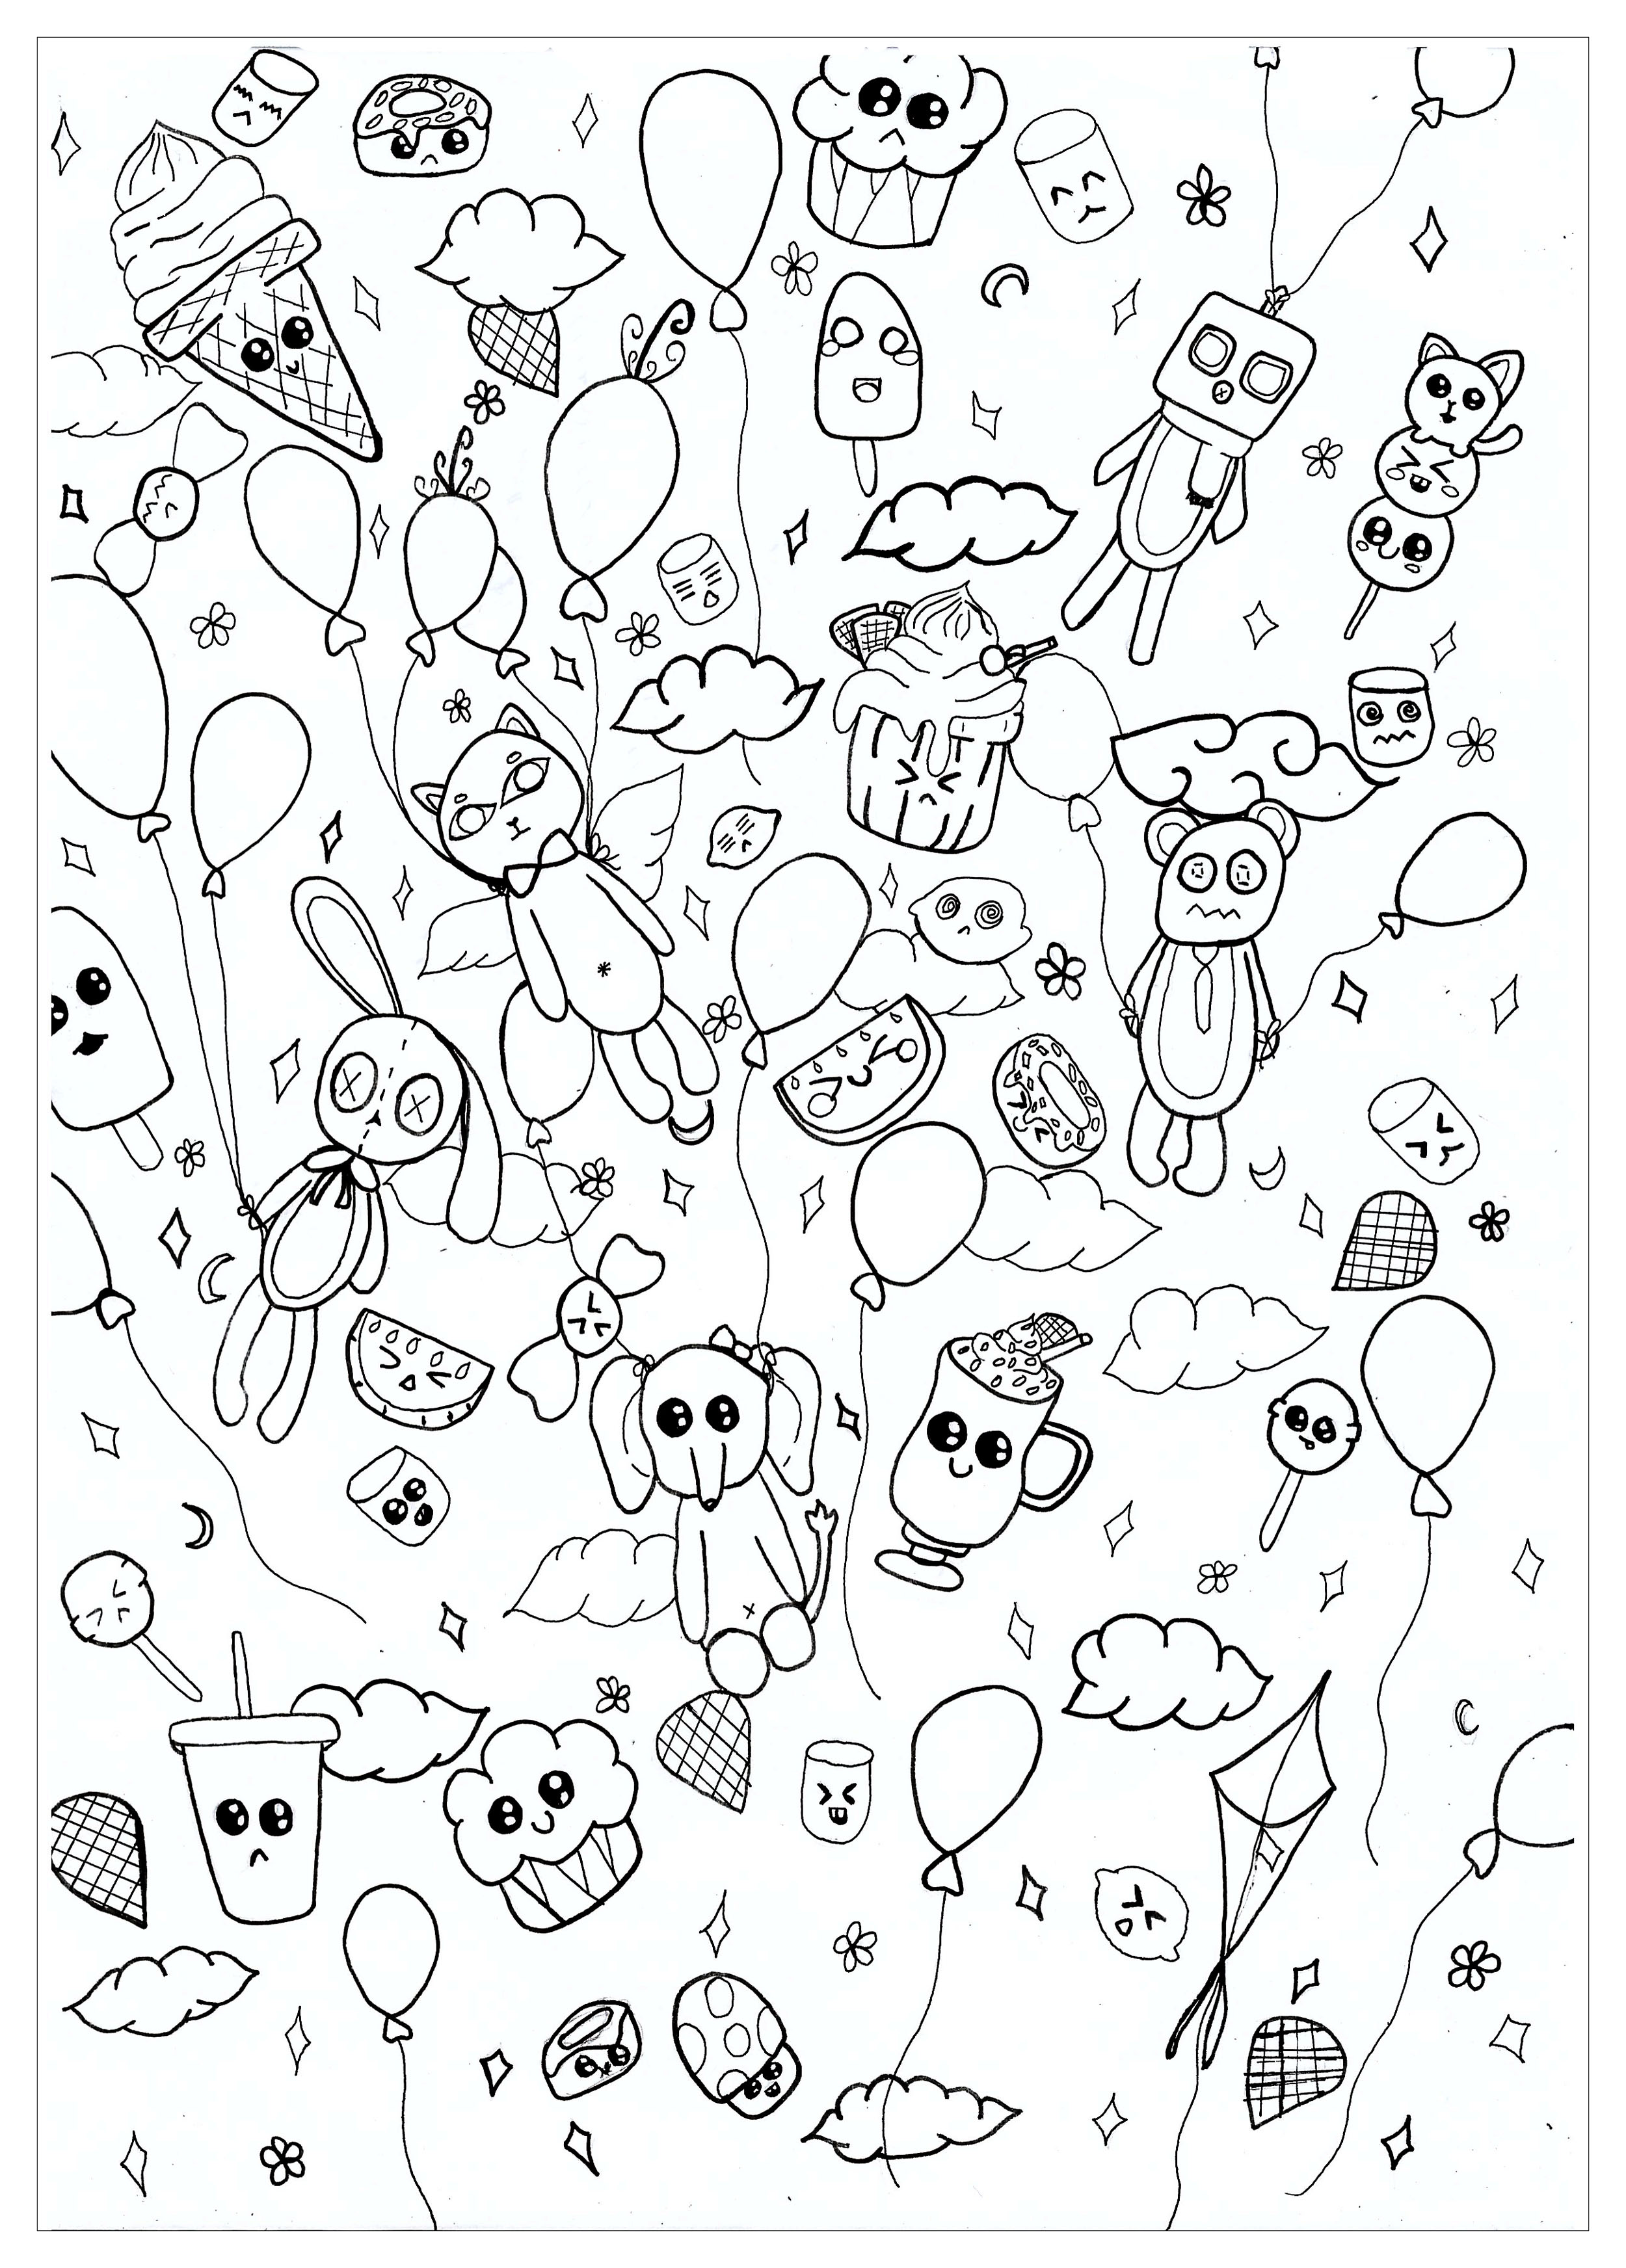 Doodle Art coloring page with few details for kids